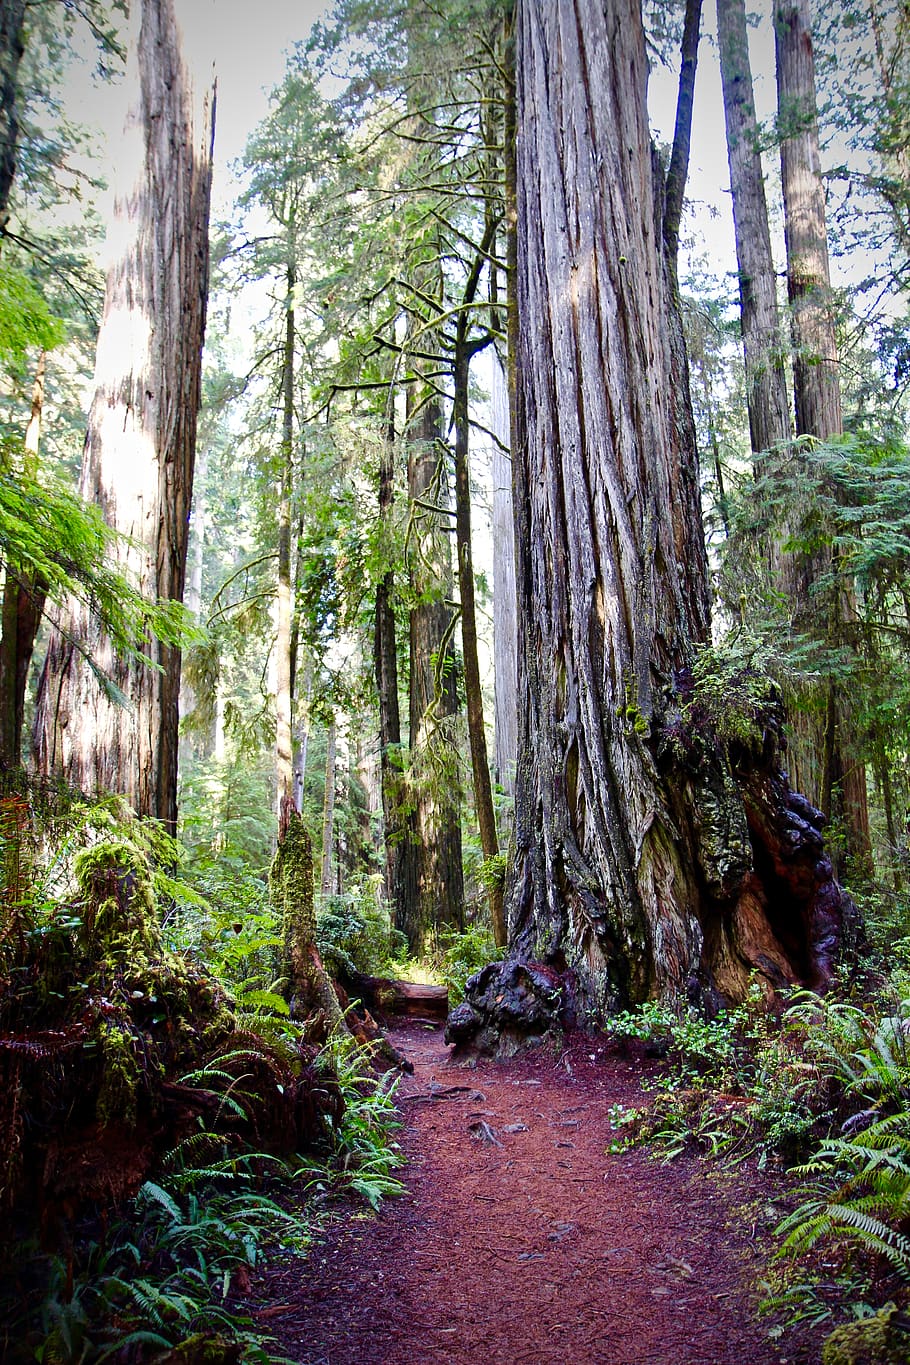 redwoods, trail, california, hiking, ancient, america, woods, environment, scenic, natural